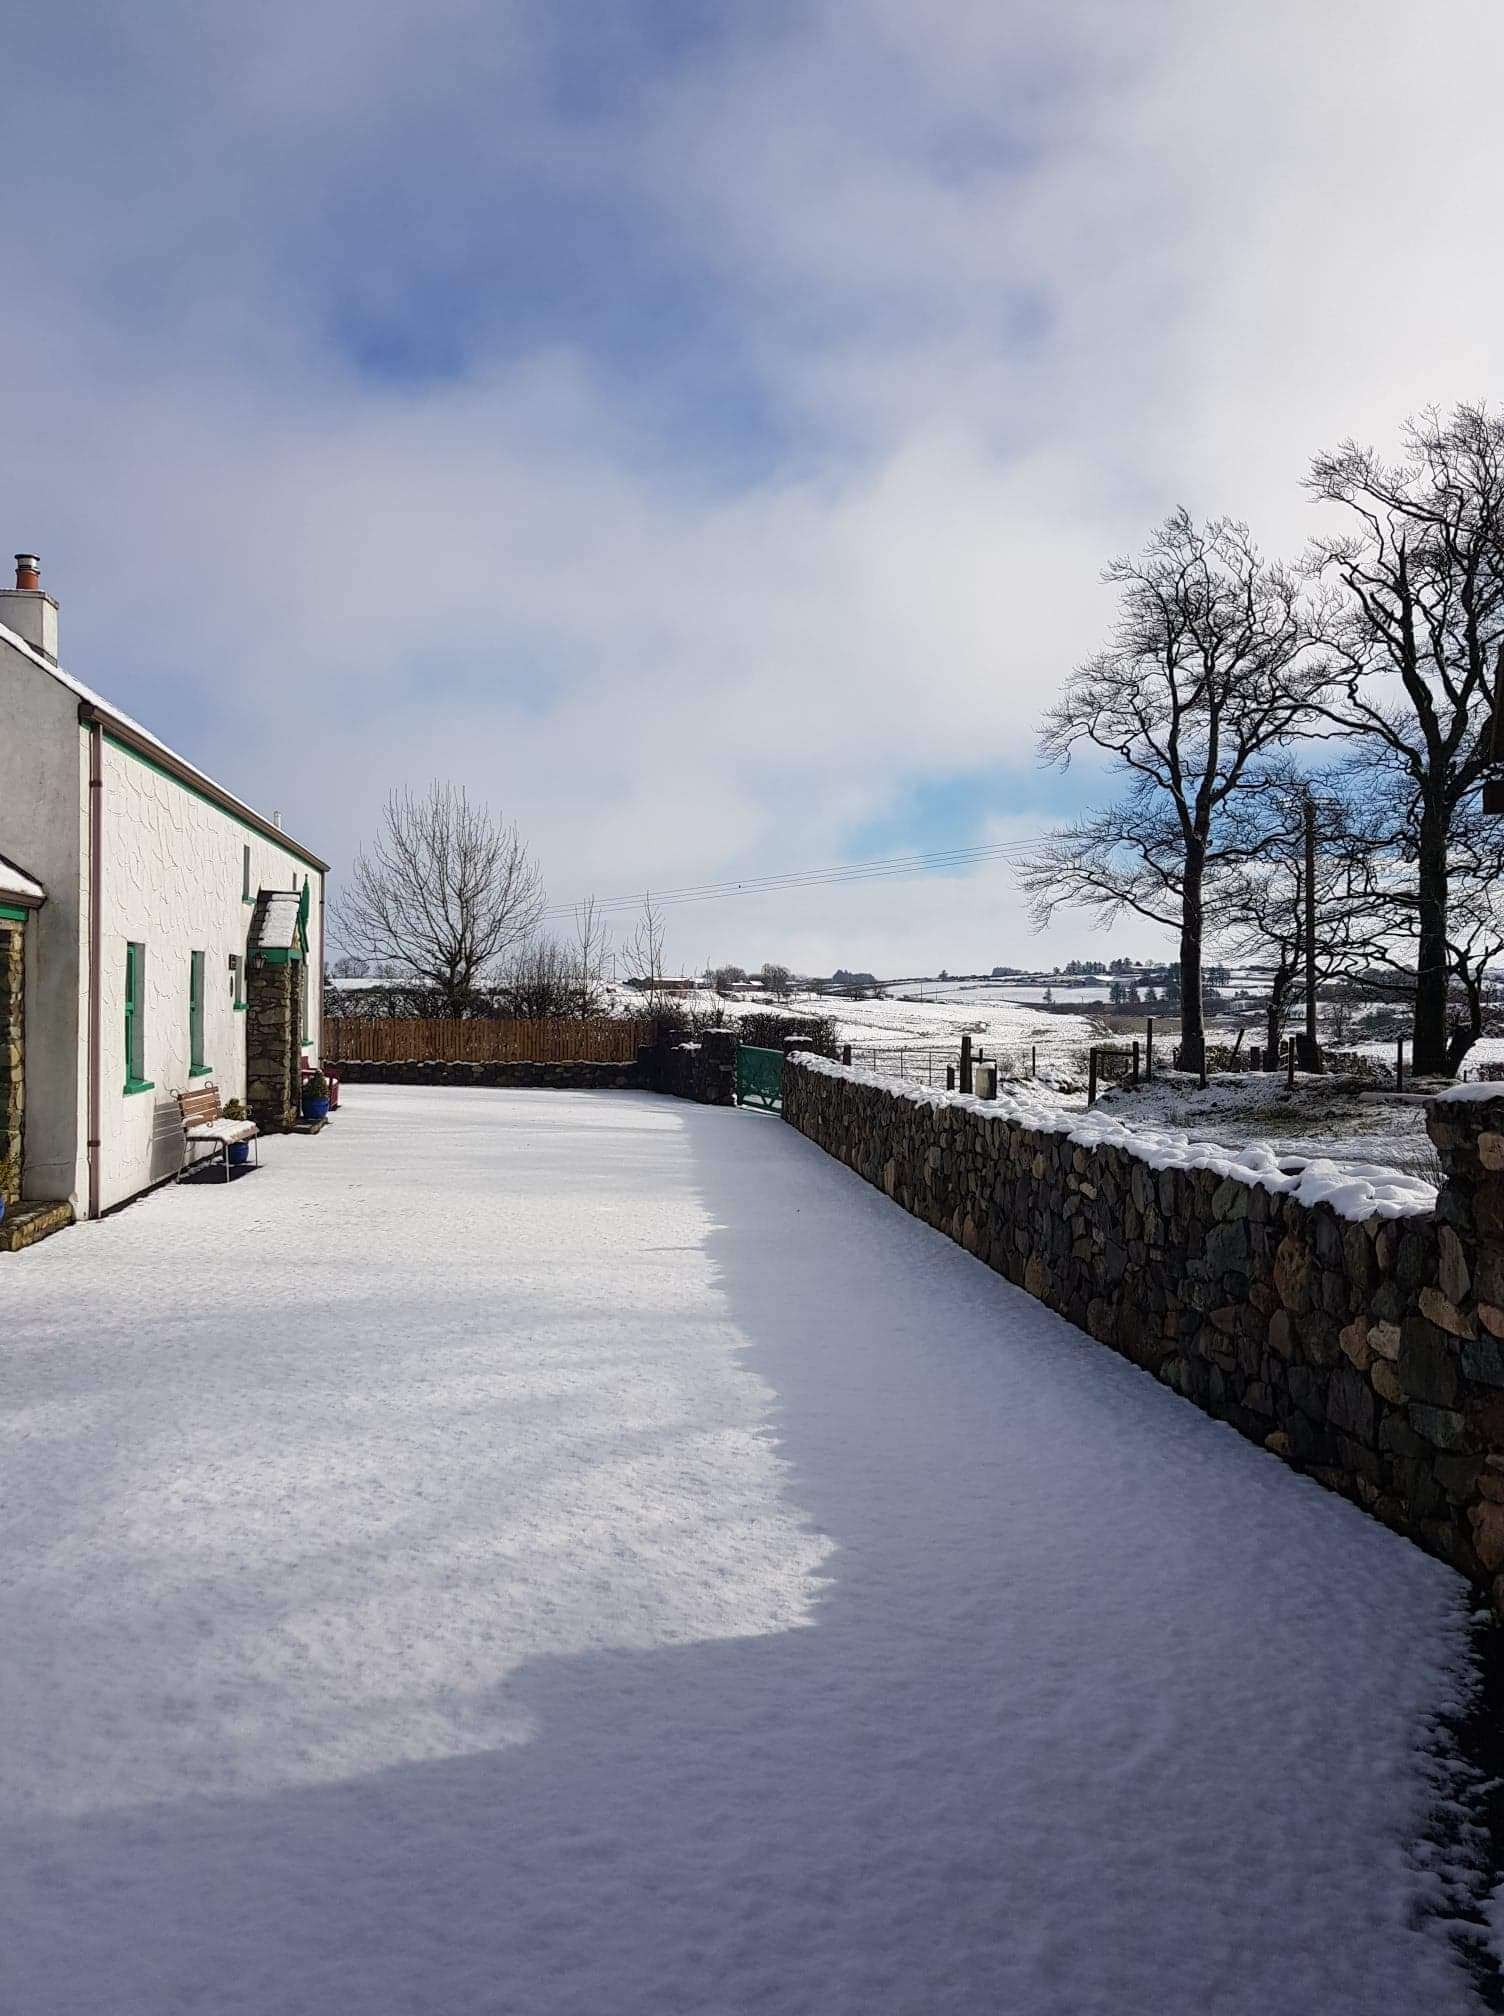 Drumaneir cottage in the winter